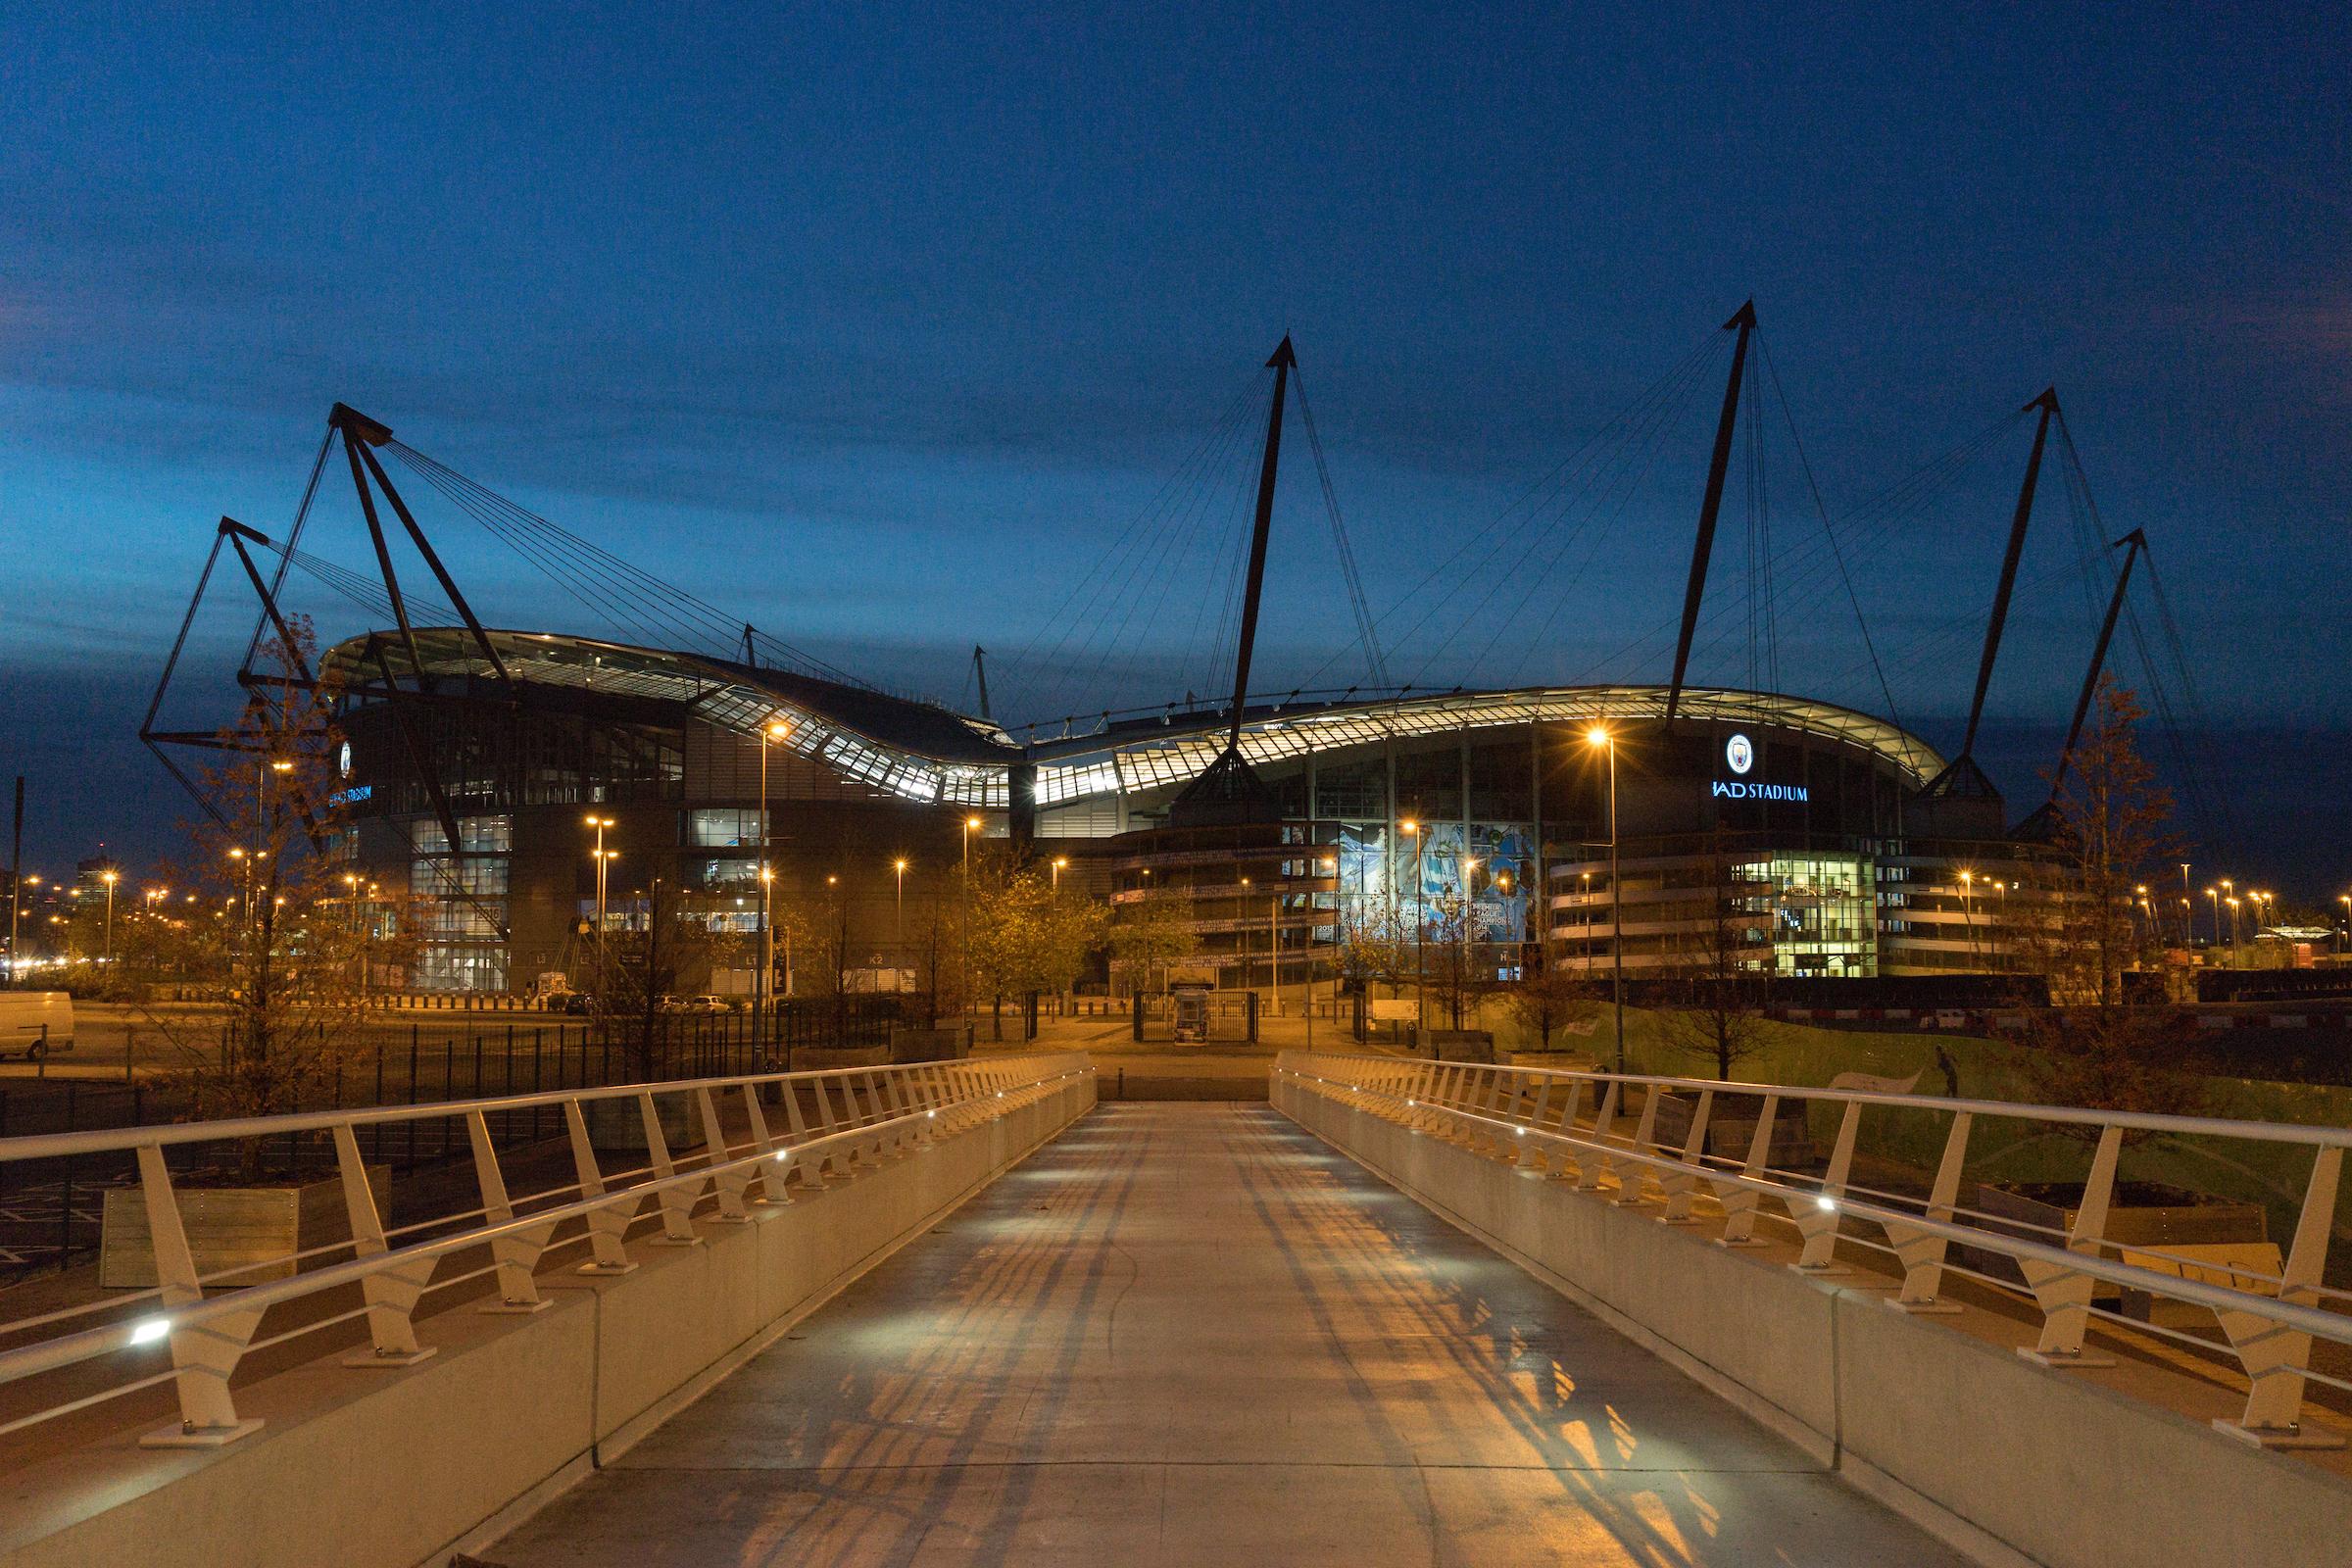 93:20 East / Central / West, The Etihad Stadium, Manchester City Football Club, Manchester photo #2